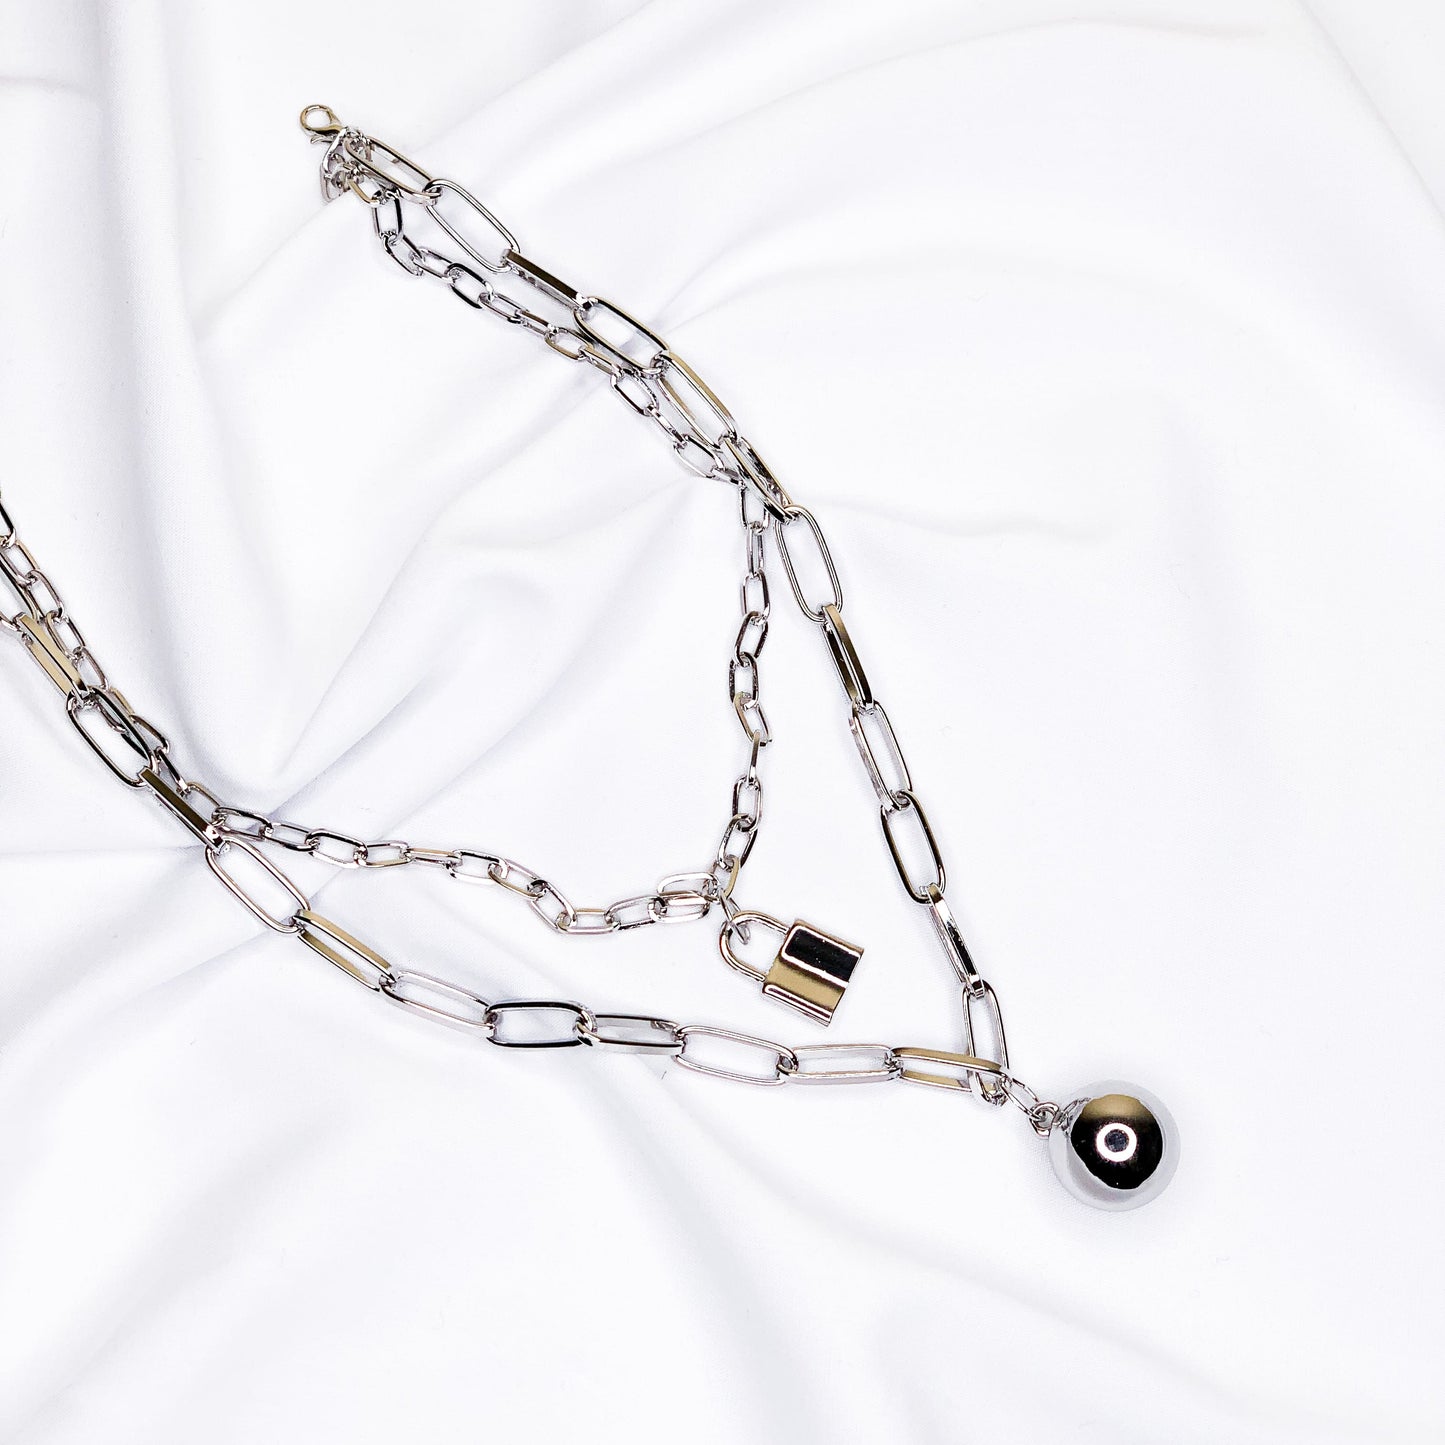 Chain necklace with ball and lock pendants